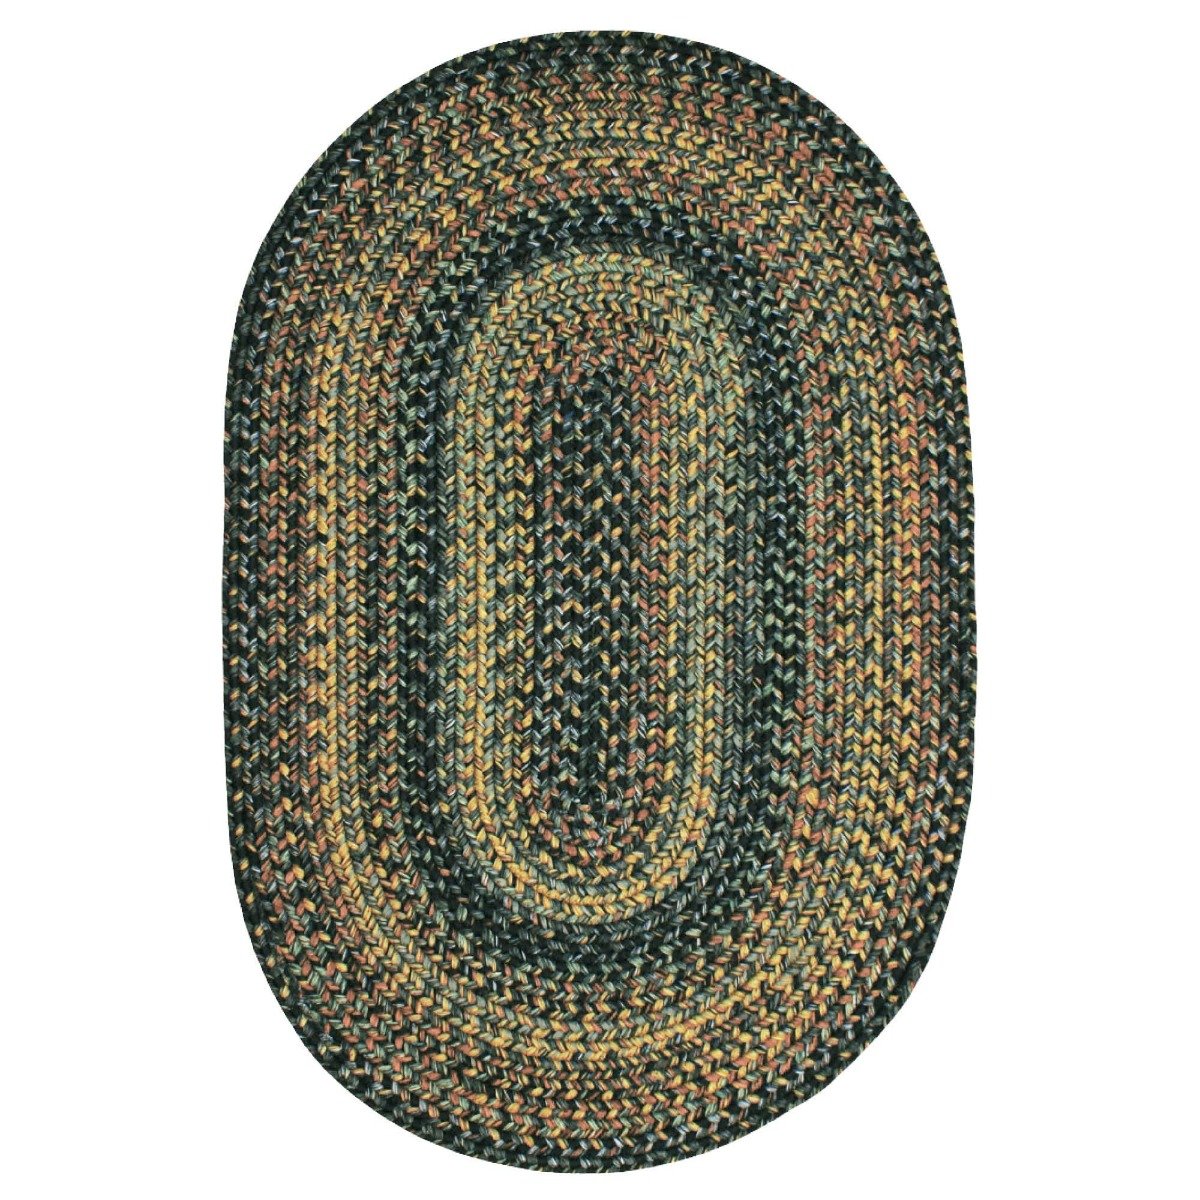 https://cdn.homespice.com/media/catalog/product/b/l/black_forest_black_oval_washabl_pet-friendly_braided_rug-silo_3_1.jpg?width=1500&height=1500&store=retail&image-type=image